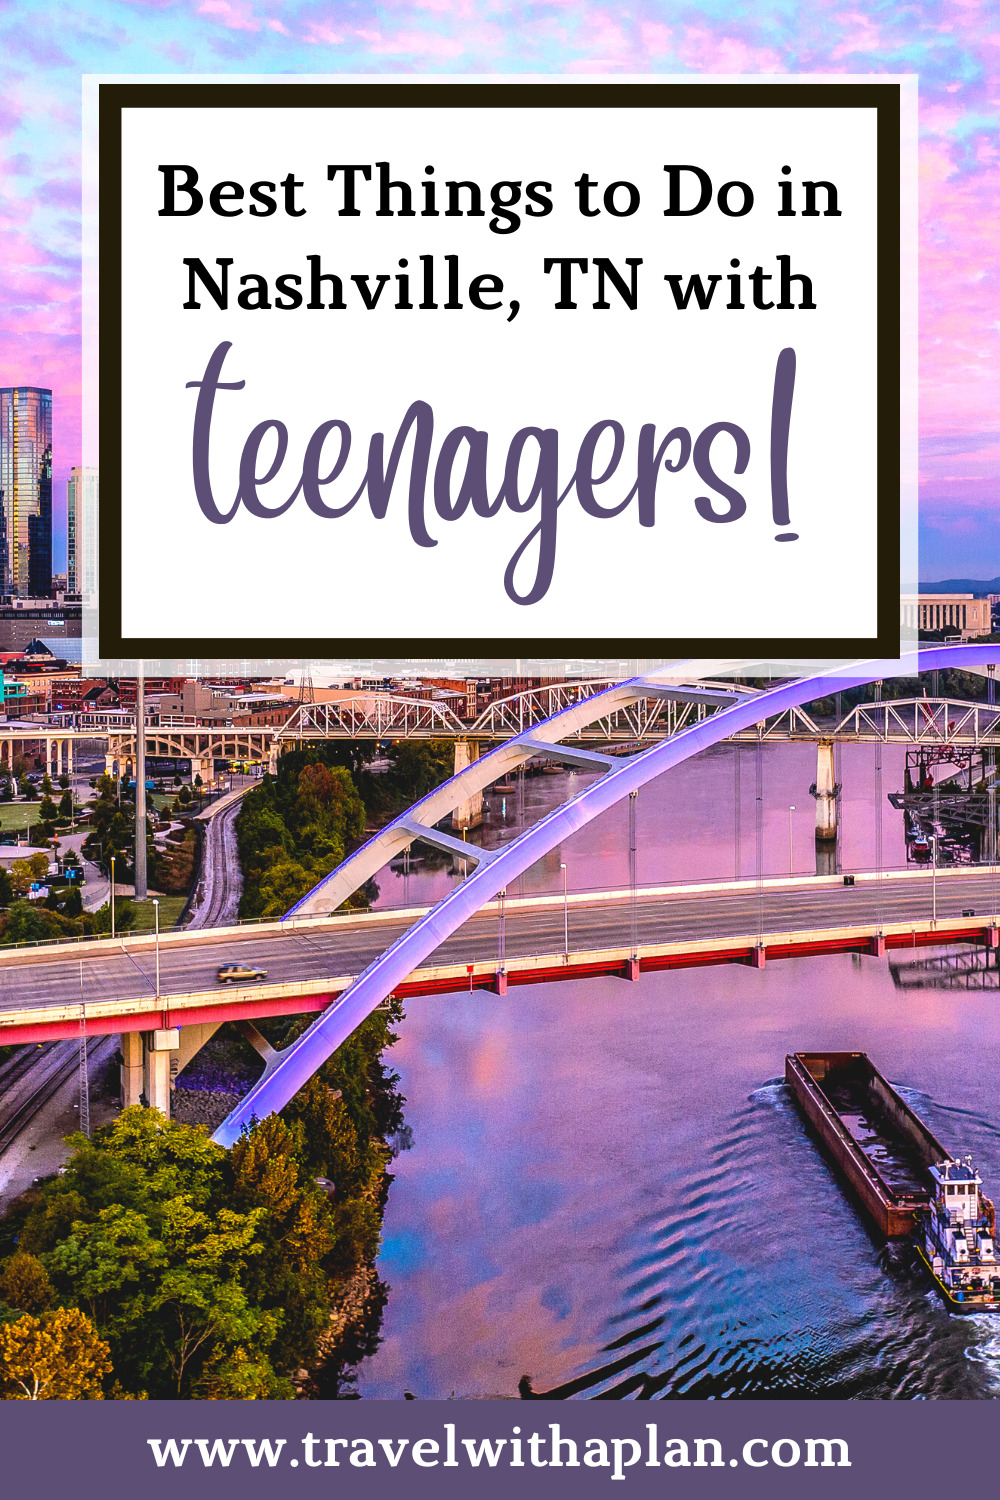 Going to Nashville with teenagers?  Check out our MEGA list of the best things to do in Nashville with teens that includes museums, honky tonks, candy shops, and shopping that they're sure to love!  #nashville #familytravel #travelwithteens